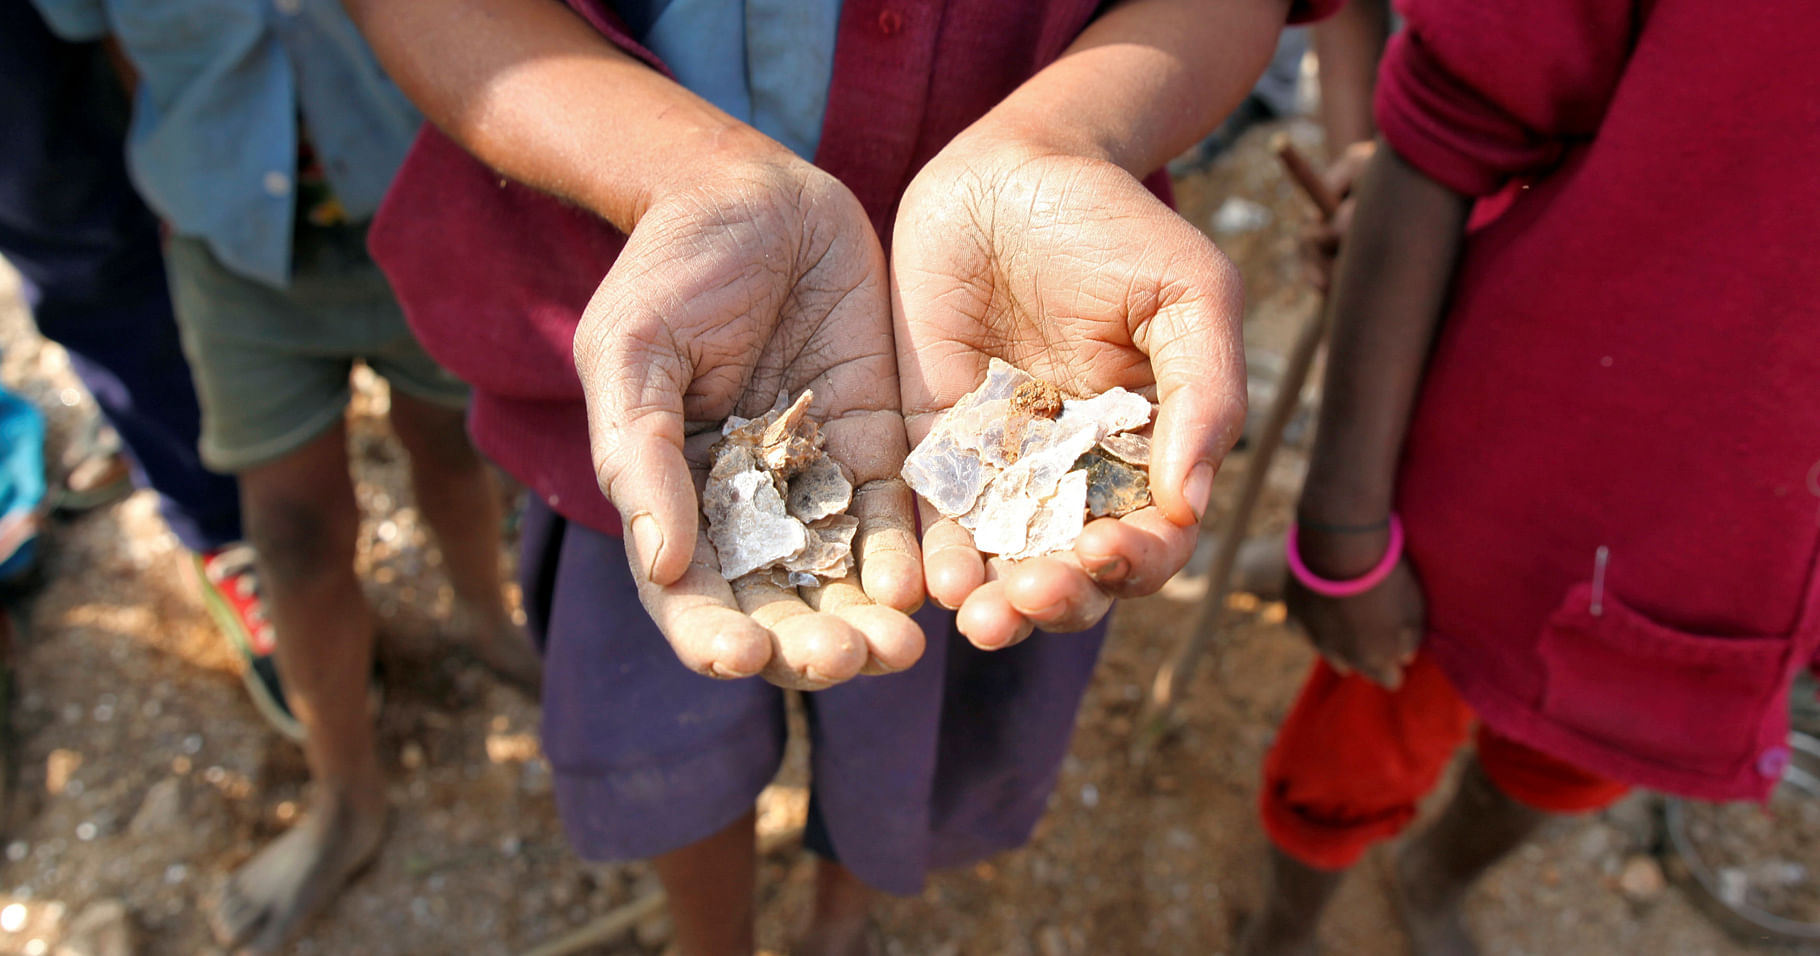 Illegal Mica Mining Continues Unabated in Jharkhand, Causing Death and  Disease – The Wire Science